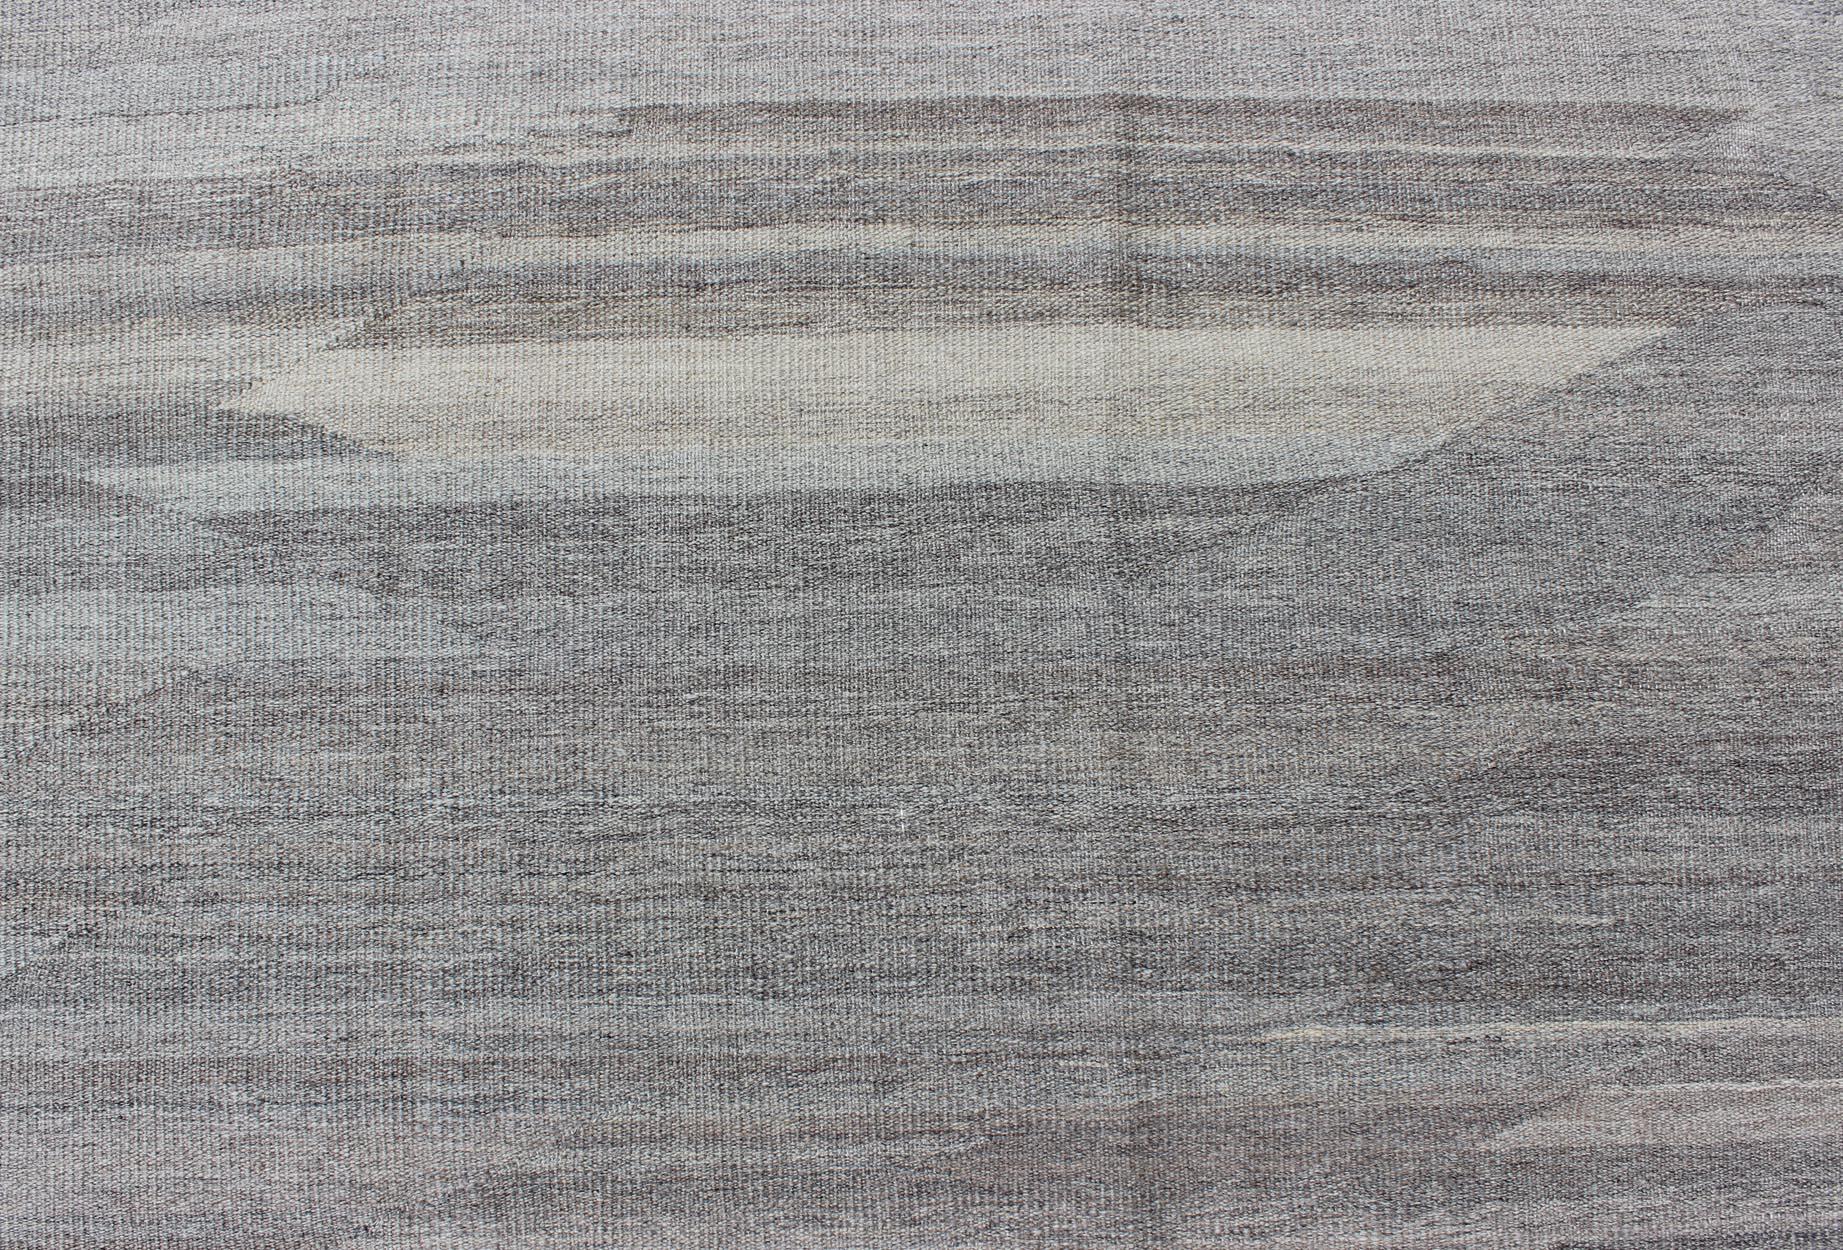 Very Large Modern Kilim with Solid Minimalist Design in Variation of Gray Tones For Sale 4